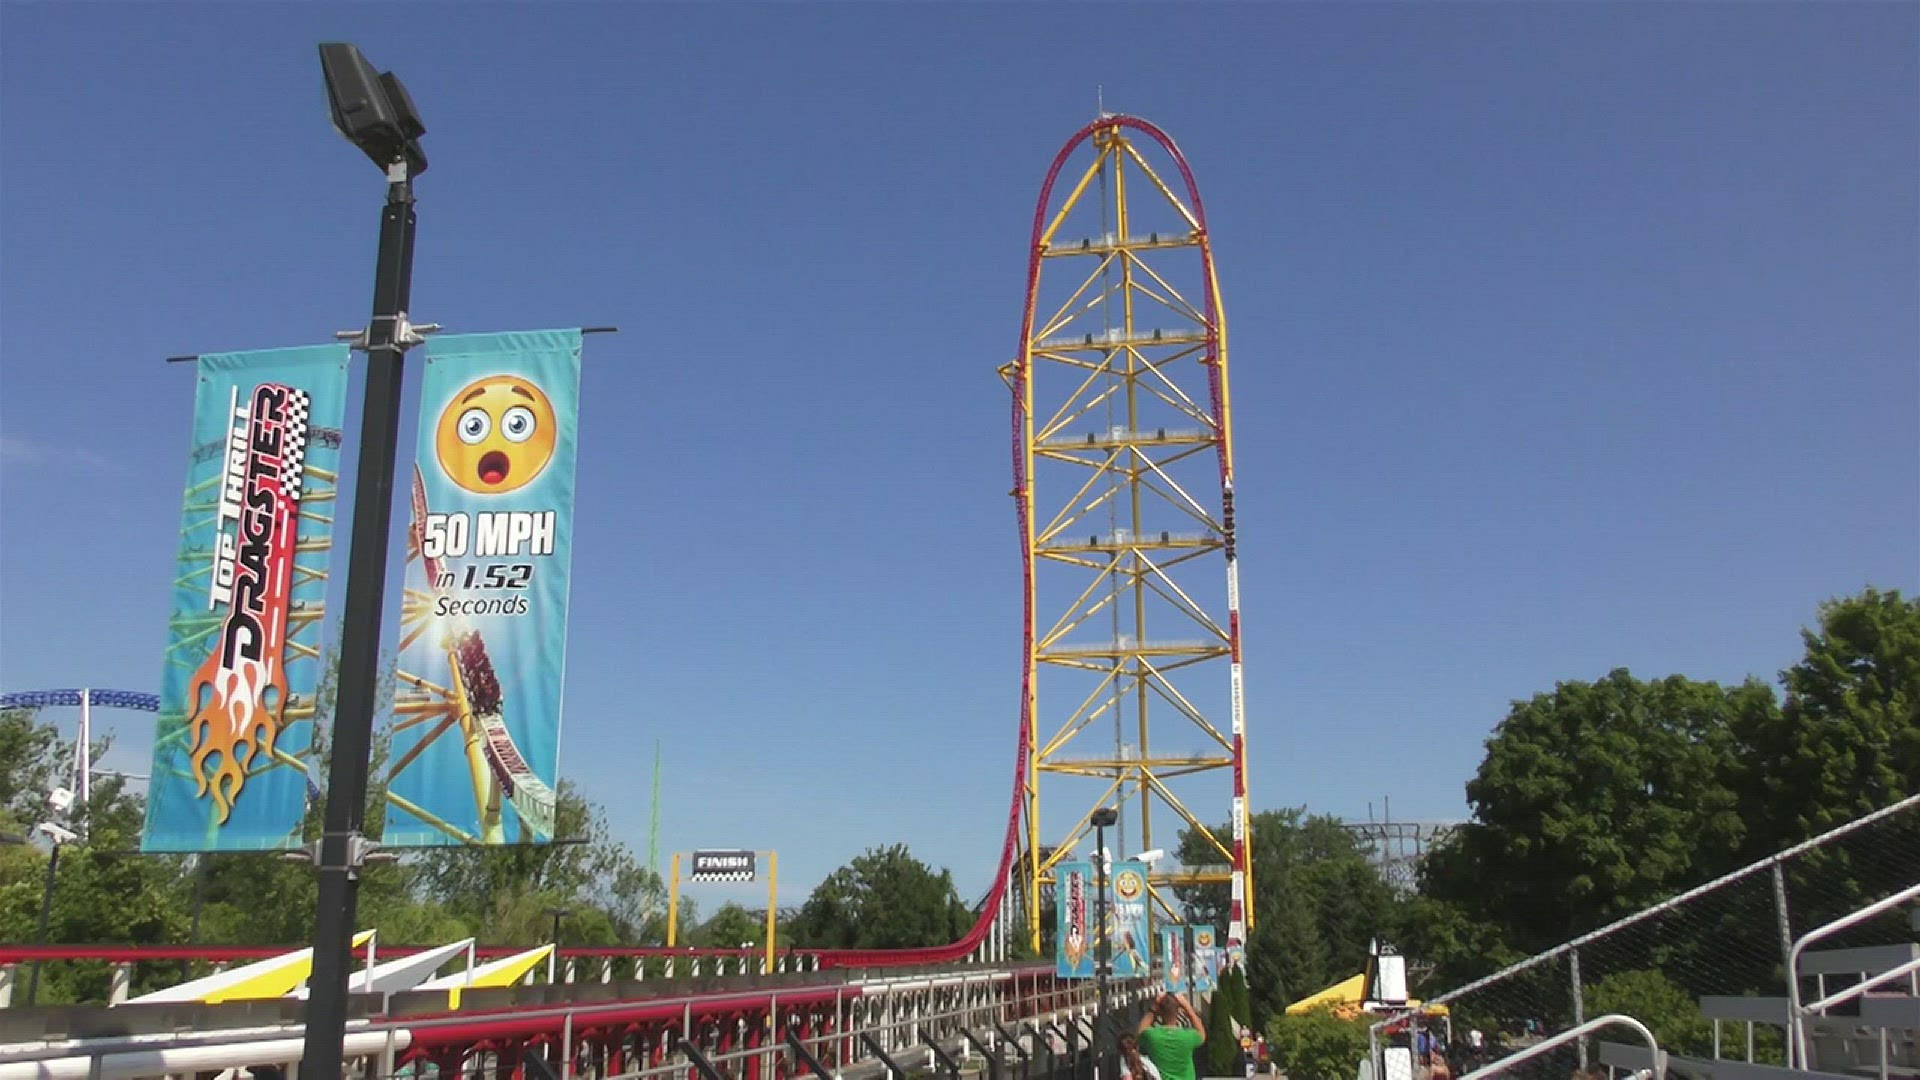 Getting into Cedar Point will cost you a bit more money this year. Ticket prices at the gate have increased to $72 for the 2018 season, which is a $5 increase compared to last year. Park spokesperson Tony Clark says guests can get discounts on tickets by